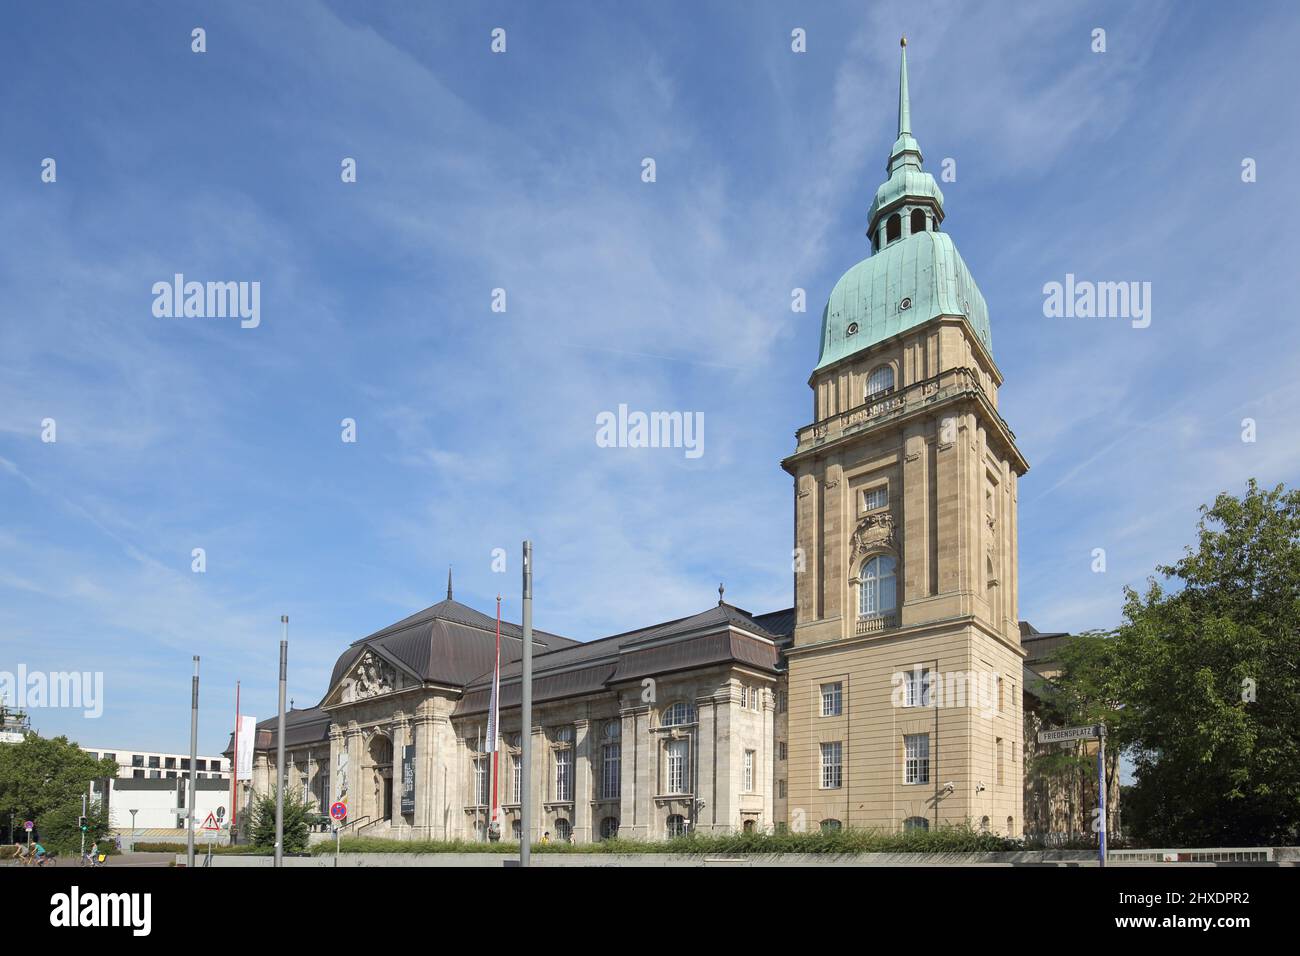 Hessian State Museum built in 1897 in Darmstadt, Hesse, Germany Stock Photo